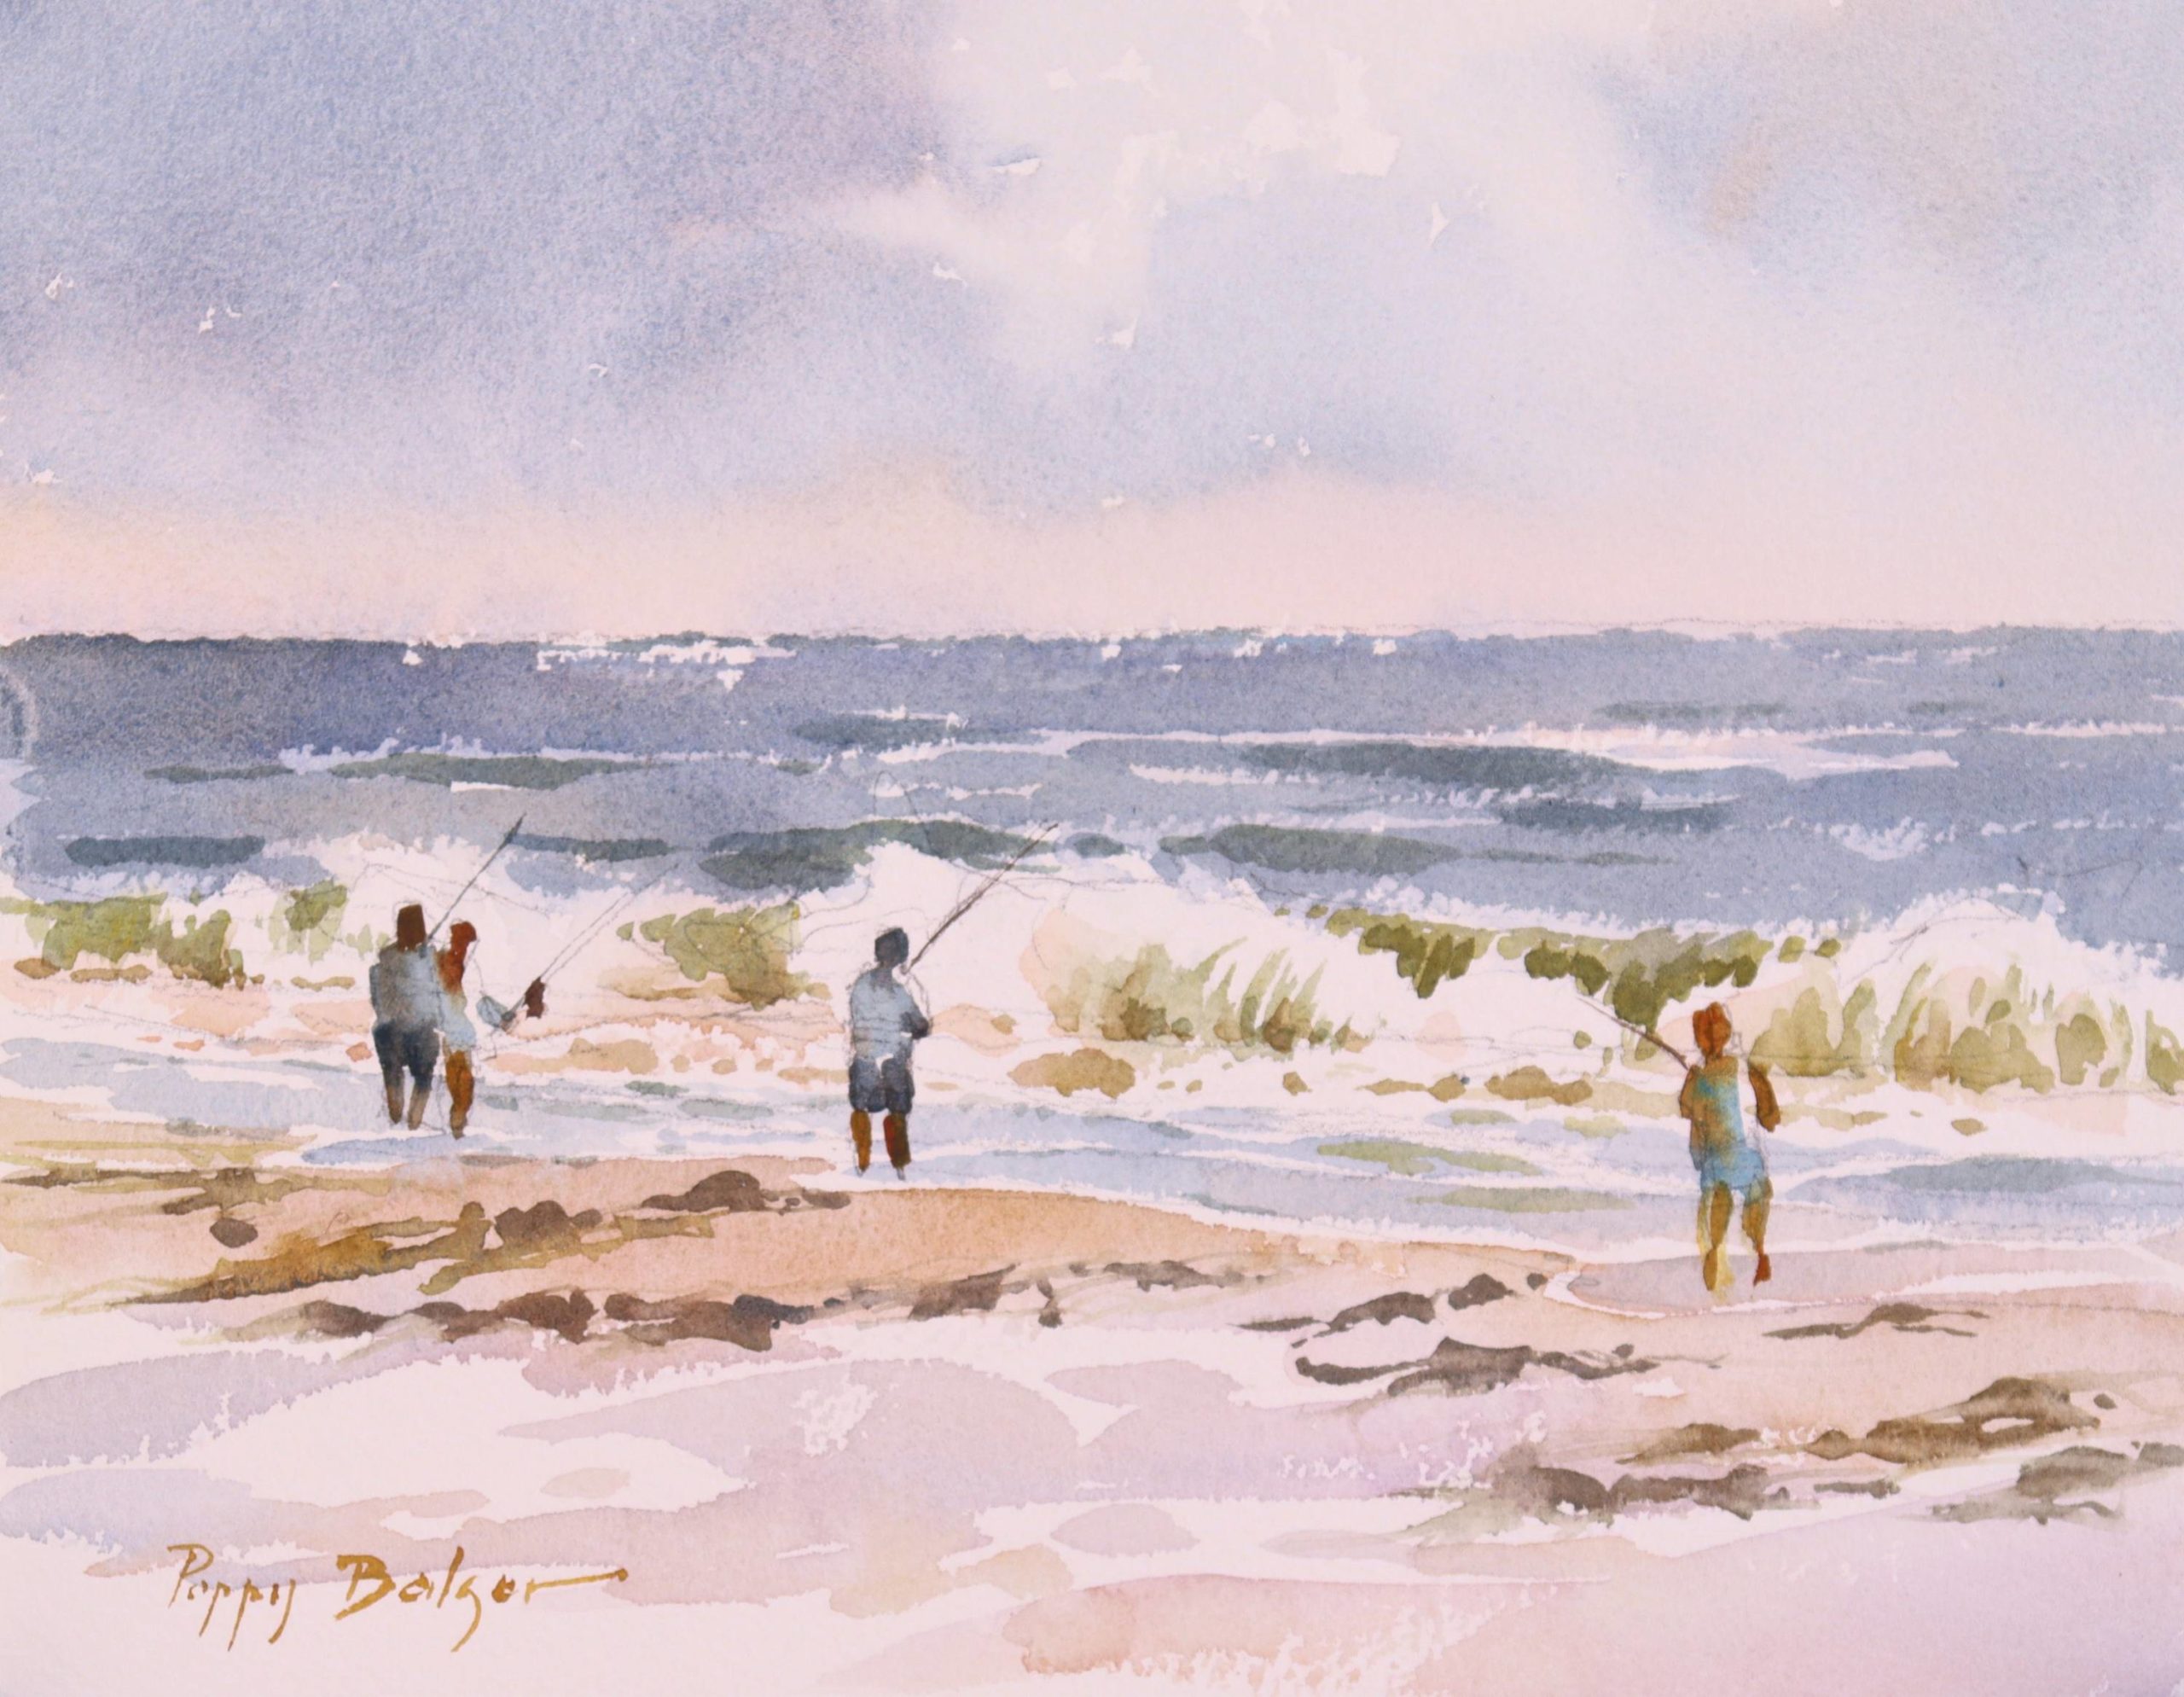 Poppy Balser, "Surf Fishing," 2022, watercolor, 8 x 10 in., Private collection, Plein air